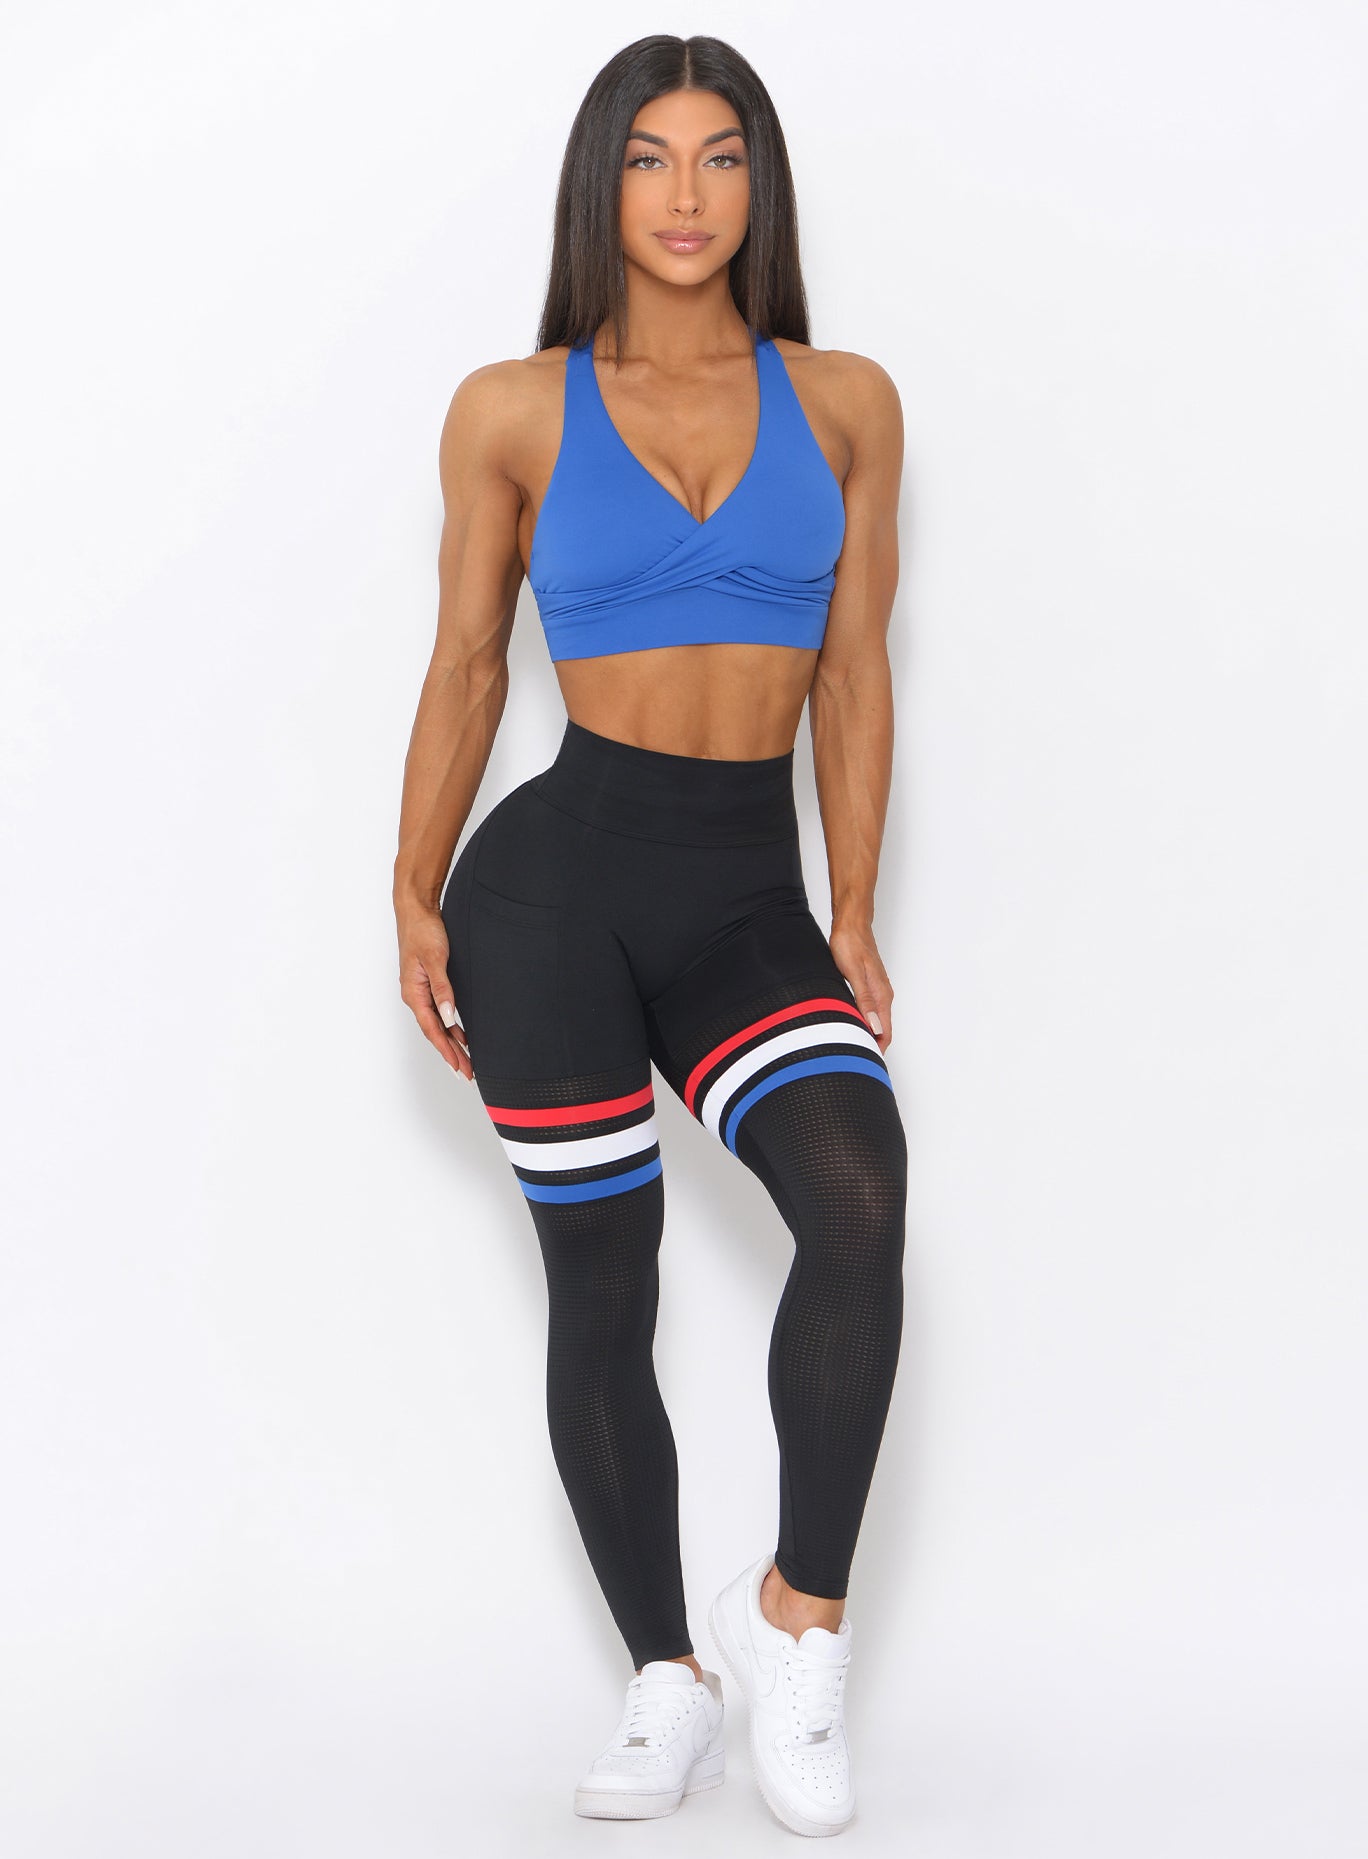 Full front view of the model wearing our blue sports bra and a black high waist thigh high leggings with three stripes on thighs